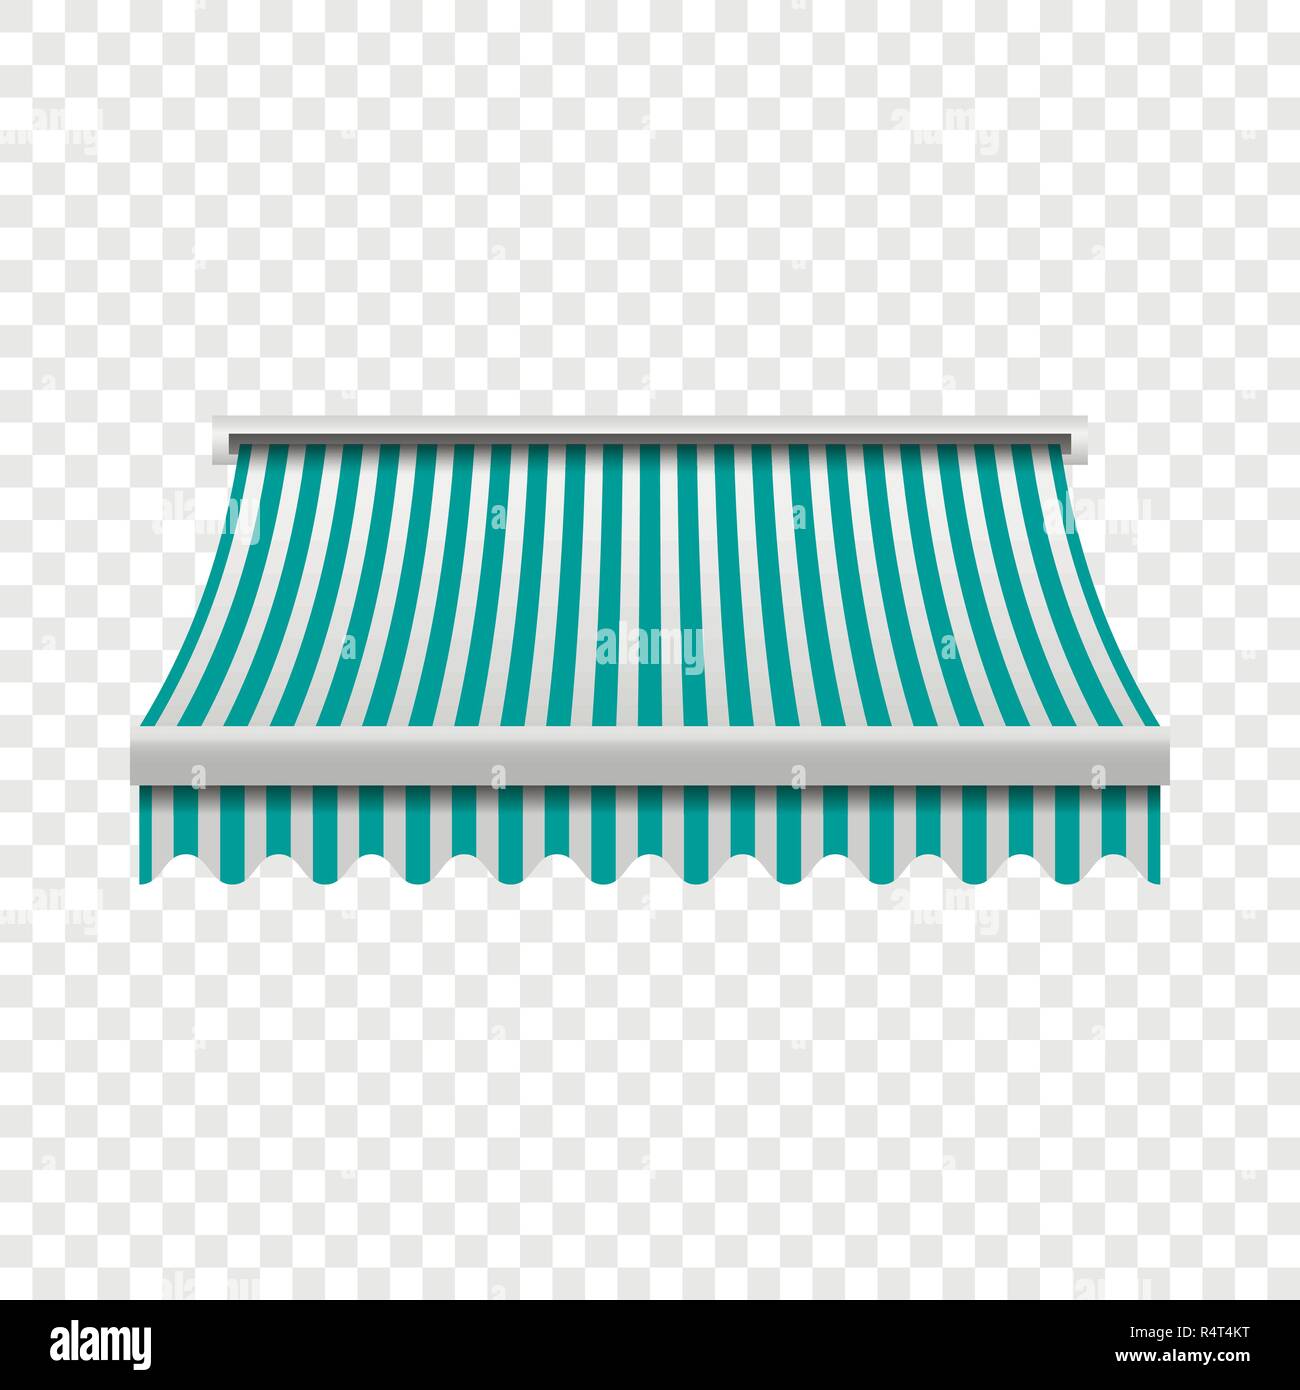 Download Green White Awning Mockup Realistic Illustration Of Green White Awning Vector Mockup For On Transparent Background Stock Vector Image Art Alamy